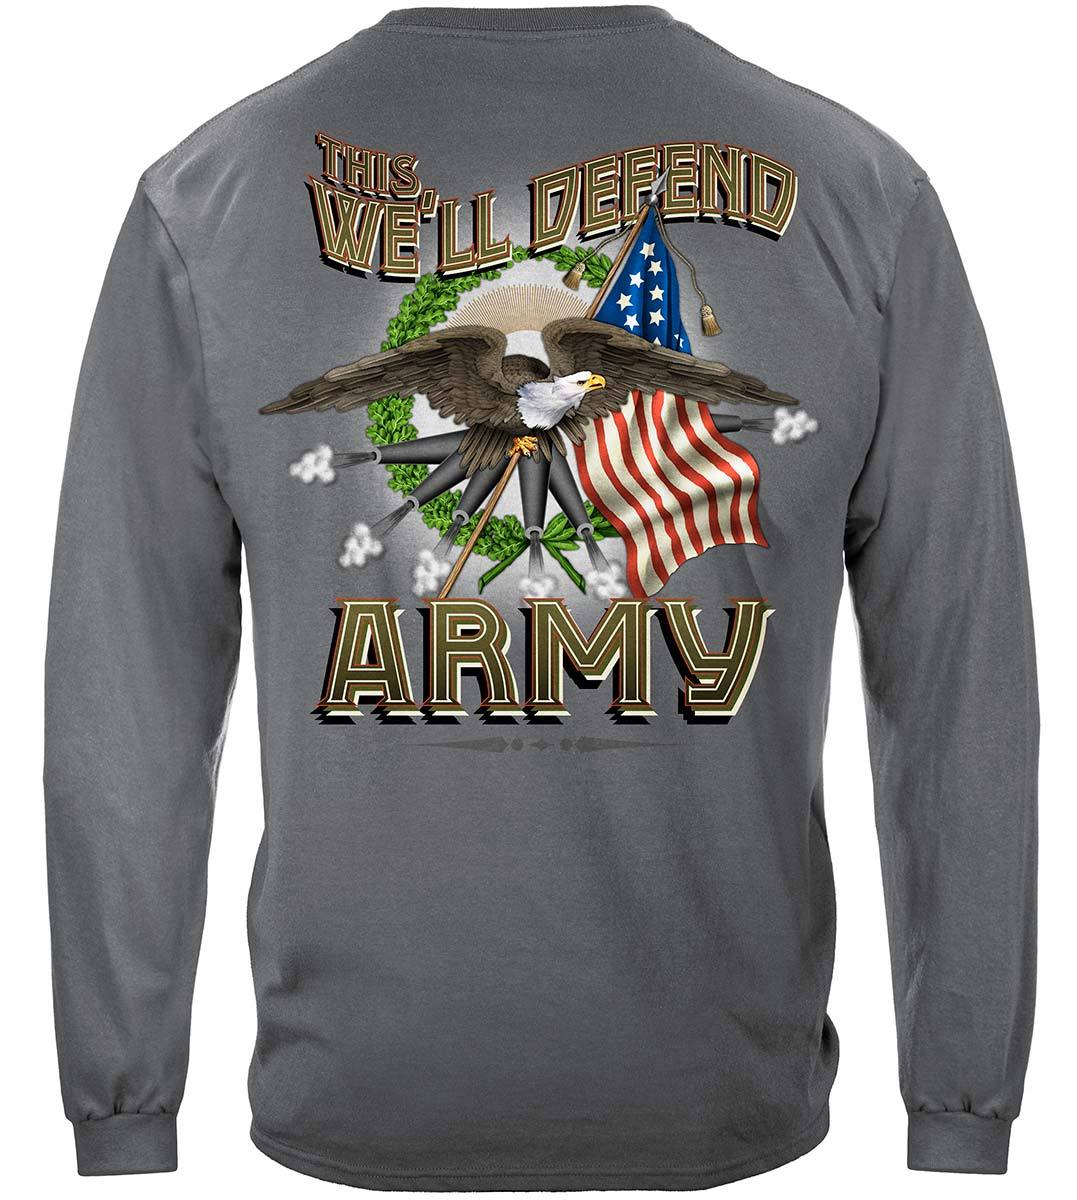 Army Cannons Premium Hooded Sweat Shirt